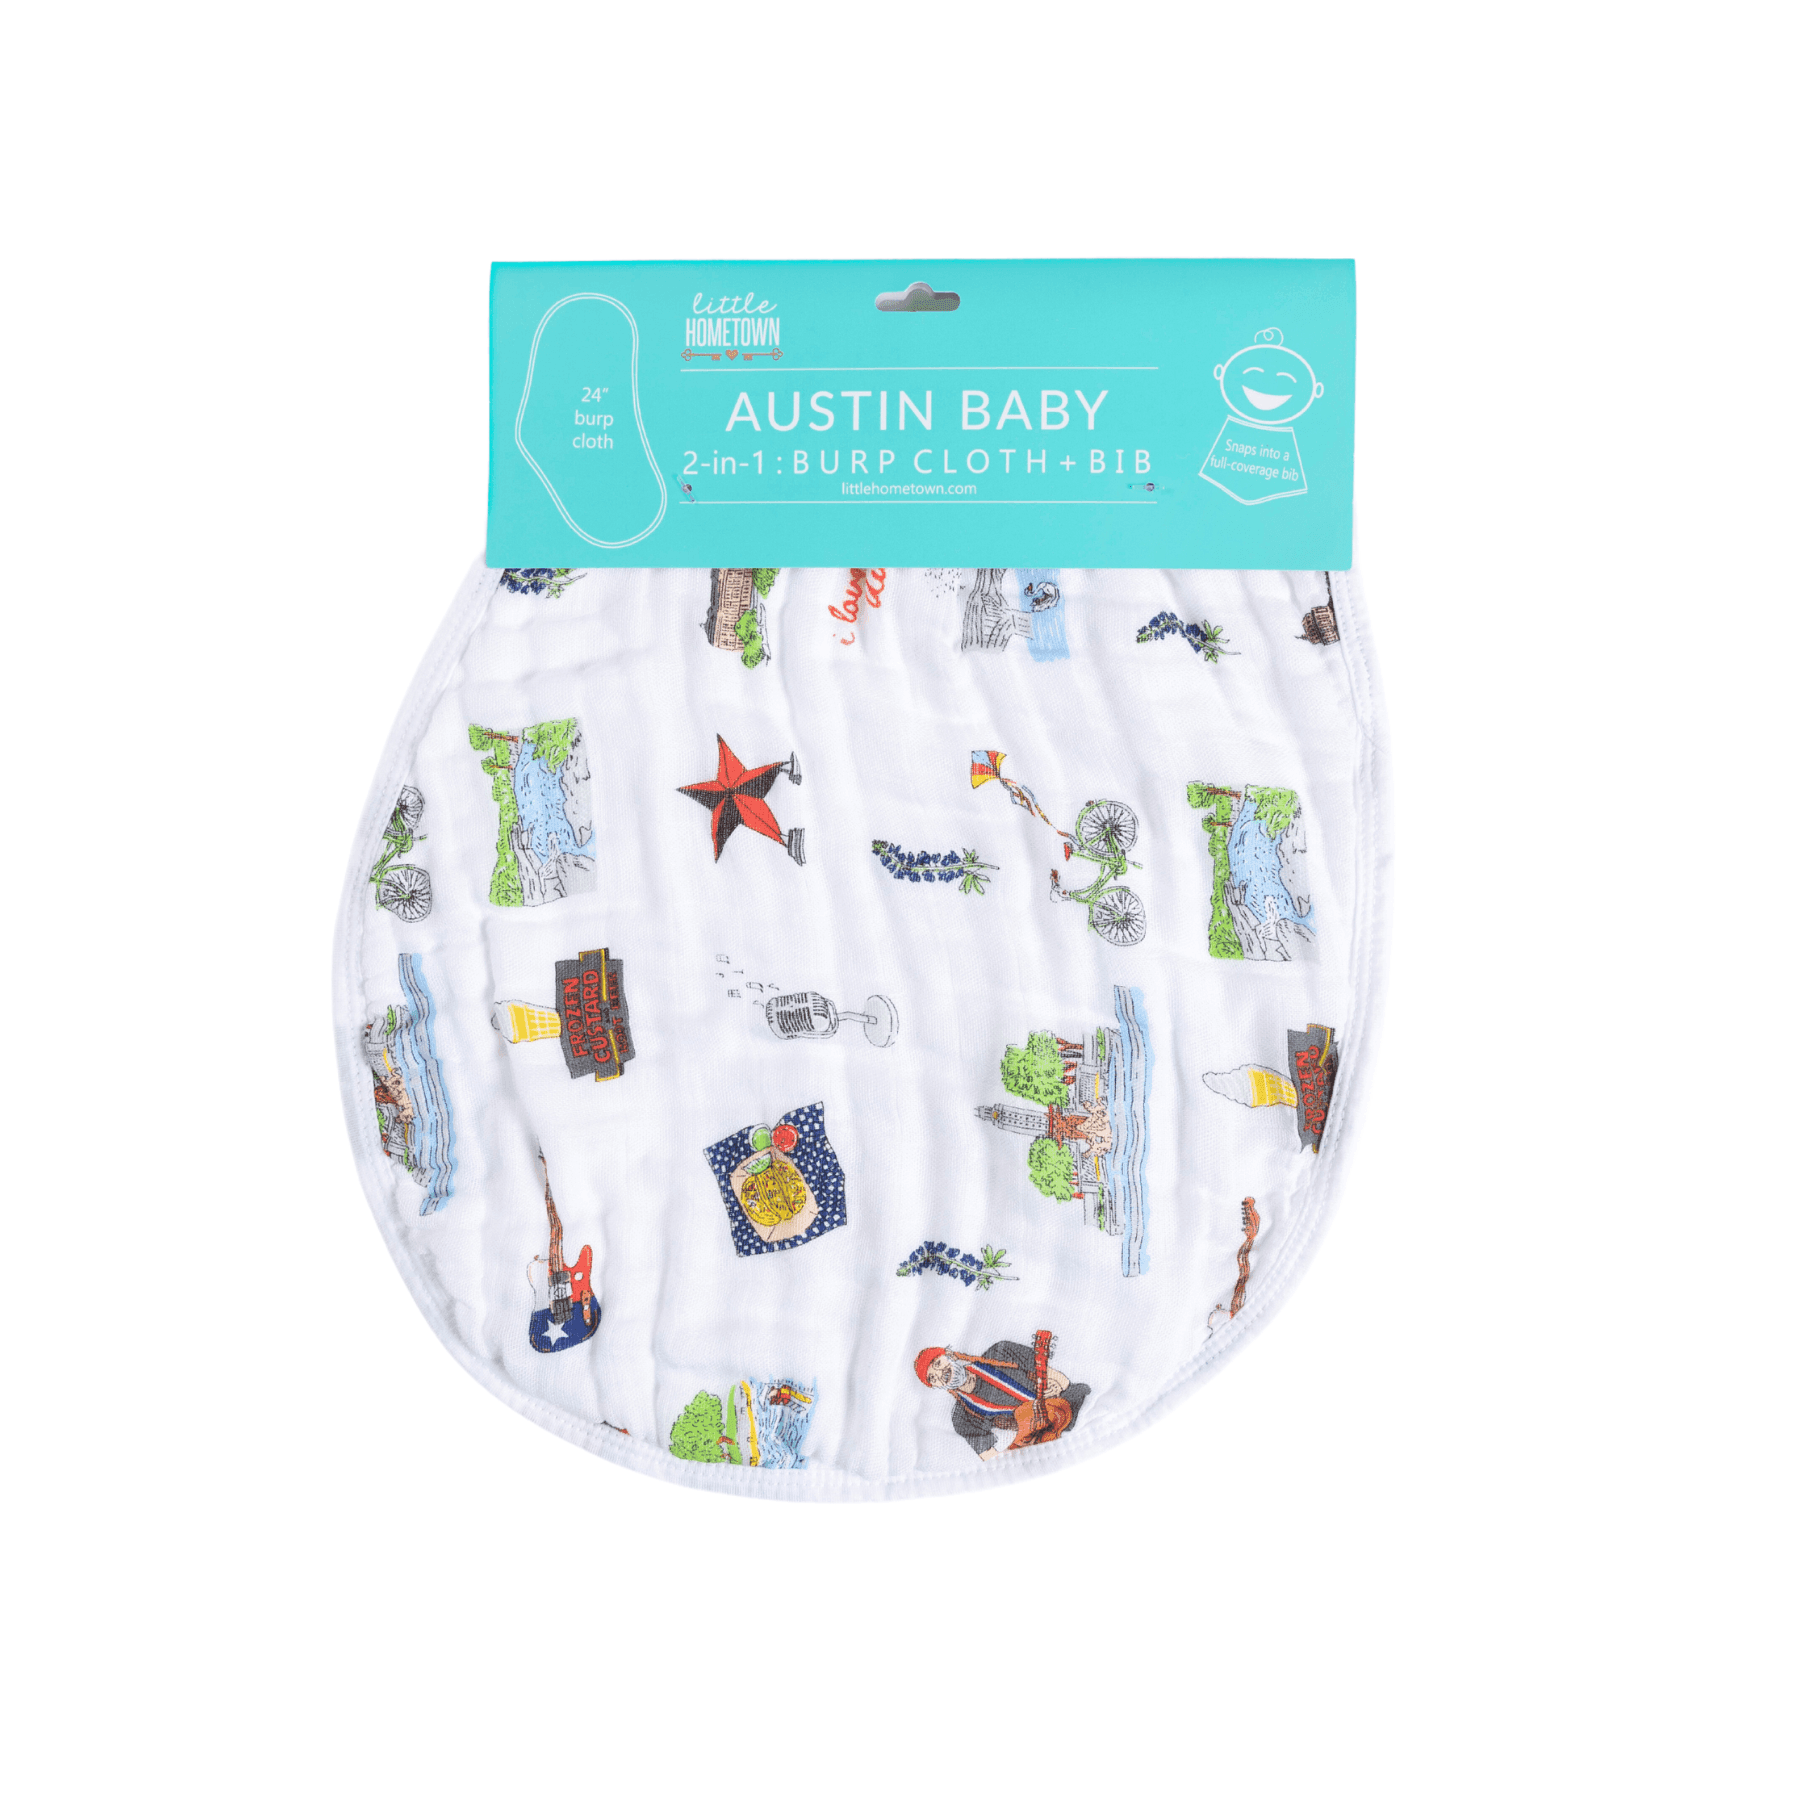 Austin-themed baby muslin swaddle blanket and burp cloth set with Texas icons, including the state flag and cowboy boots.